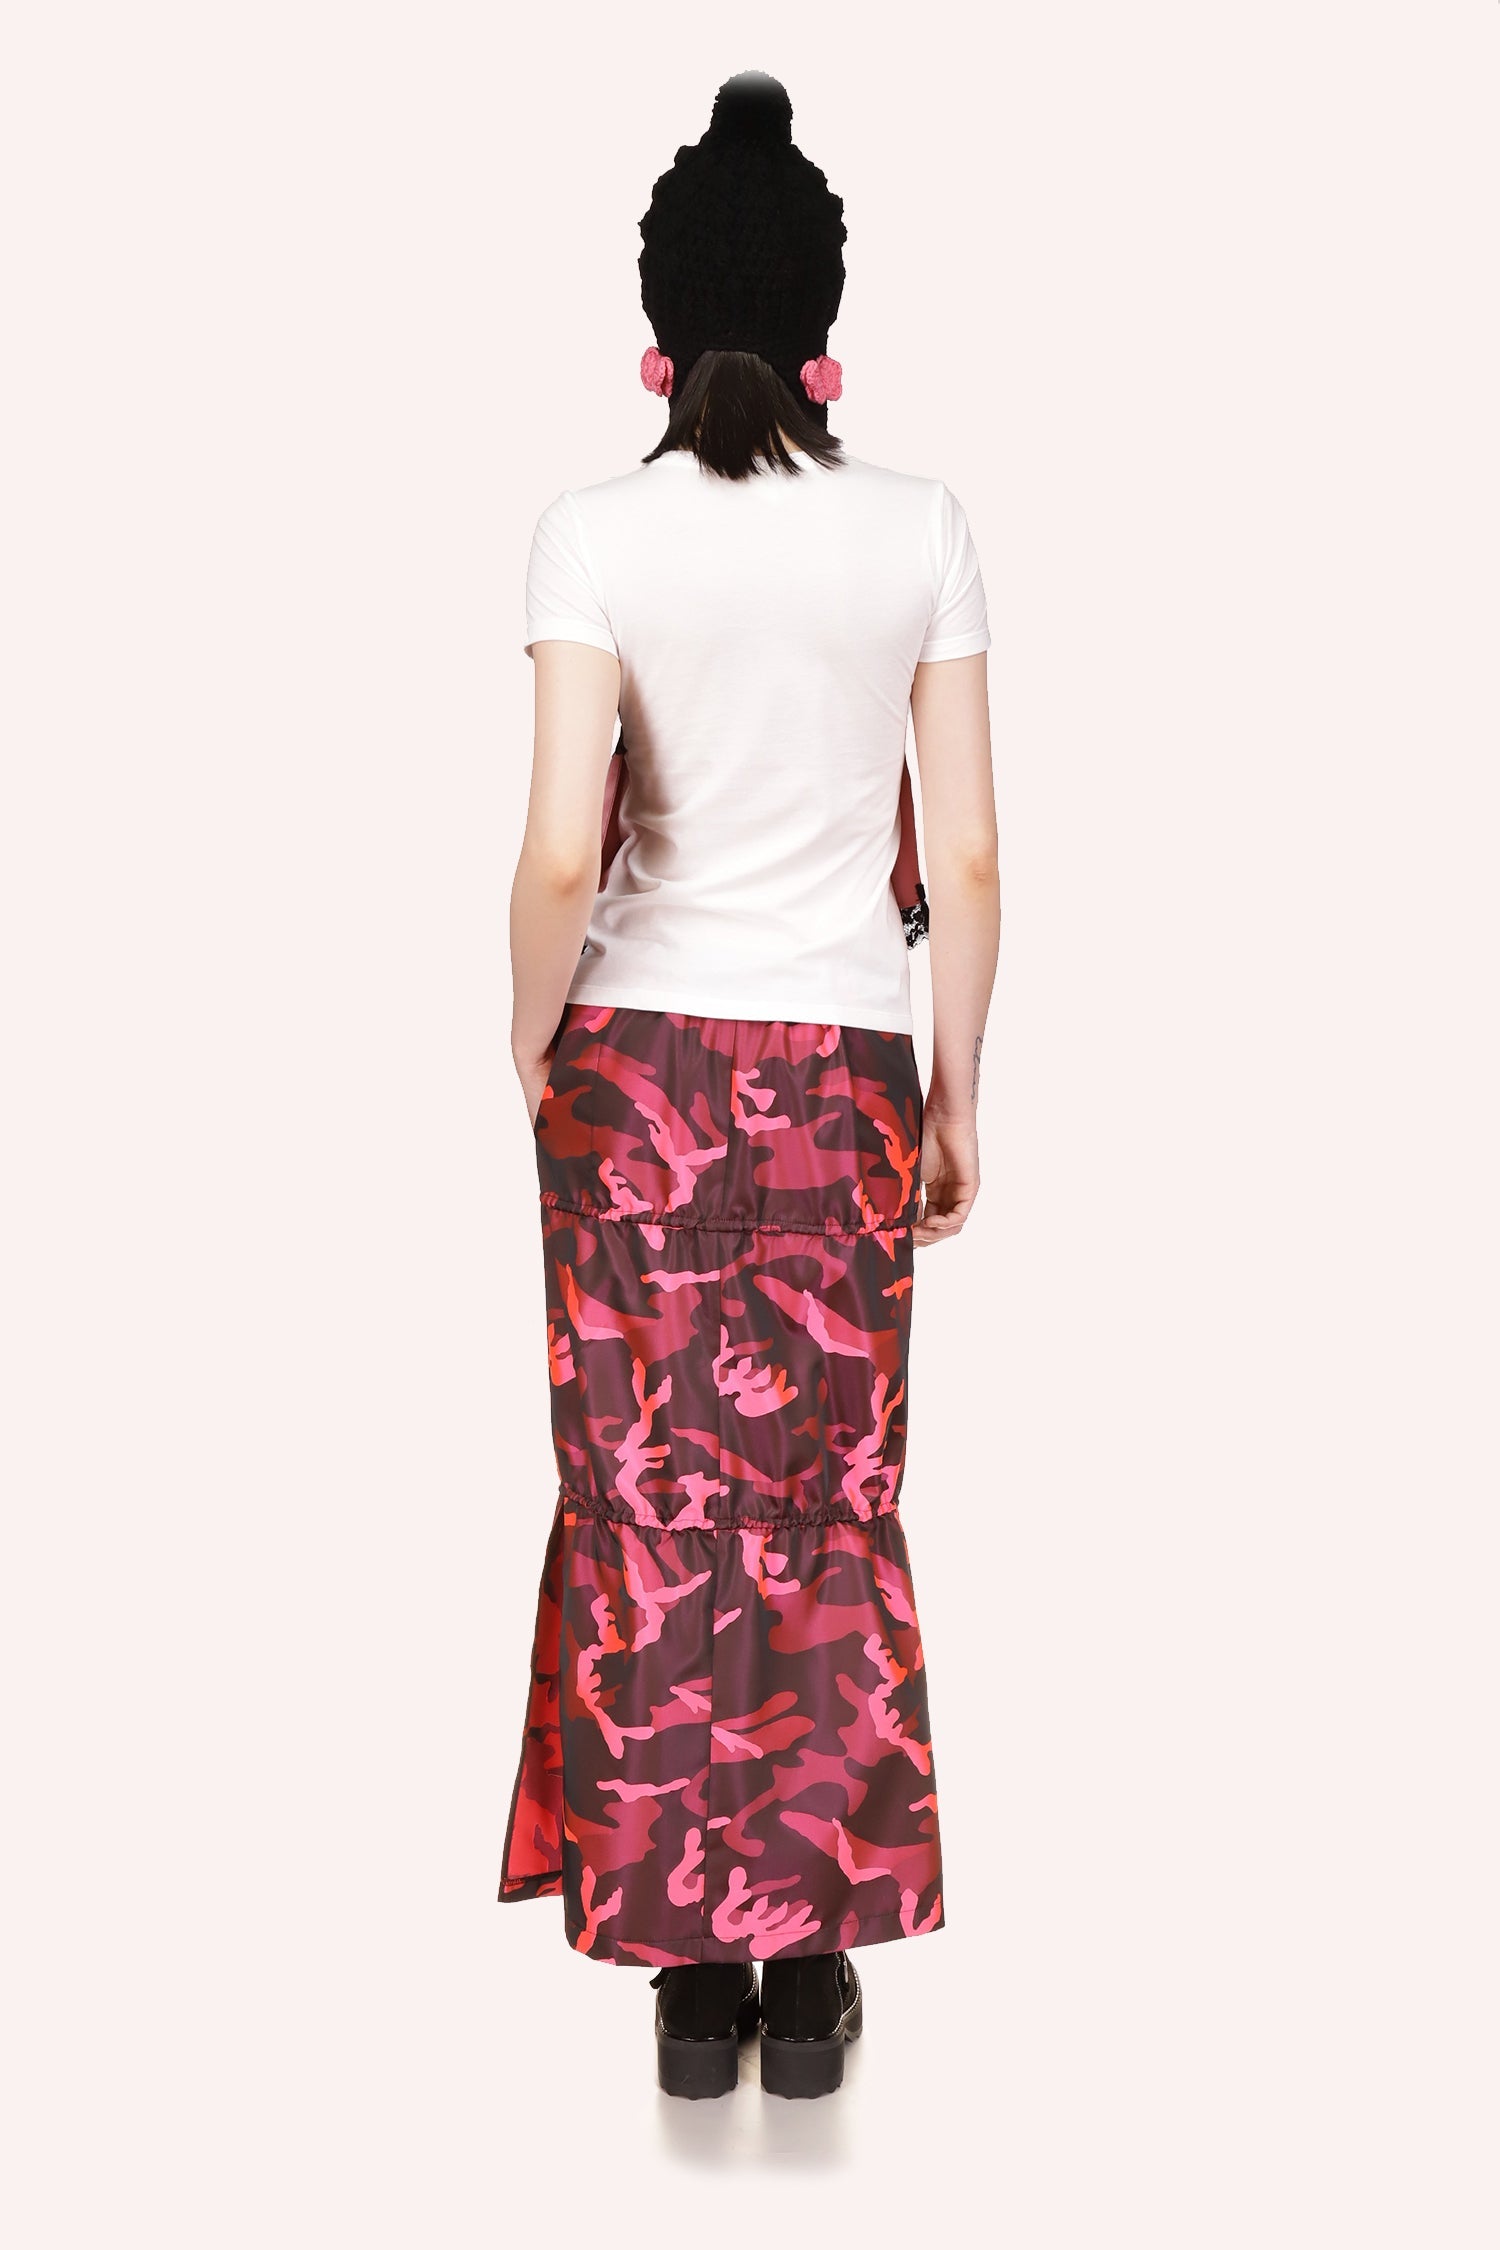 Ankle-long skirt, Pink Camouflage Style , 3 levels, side cut from knee down, side pocket, 2-laces to adjust